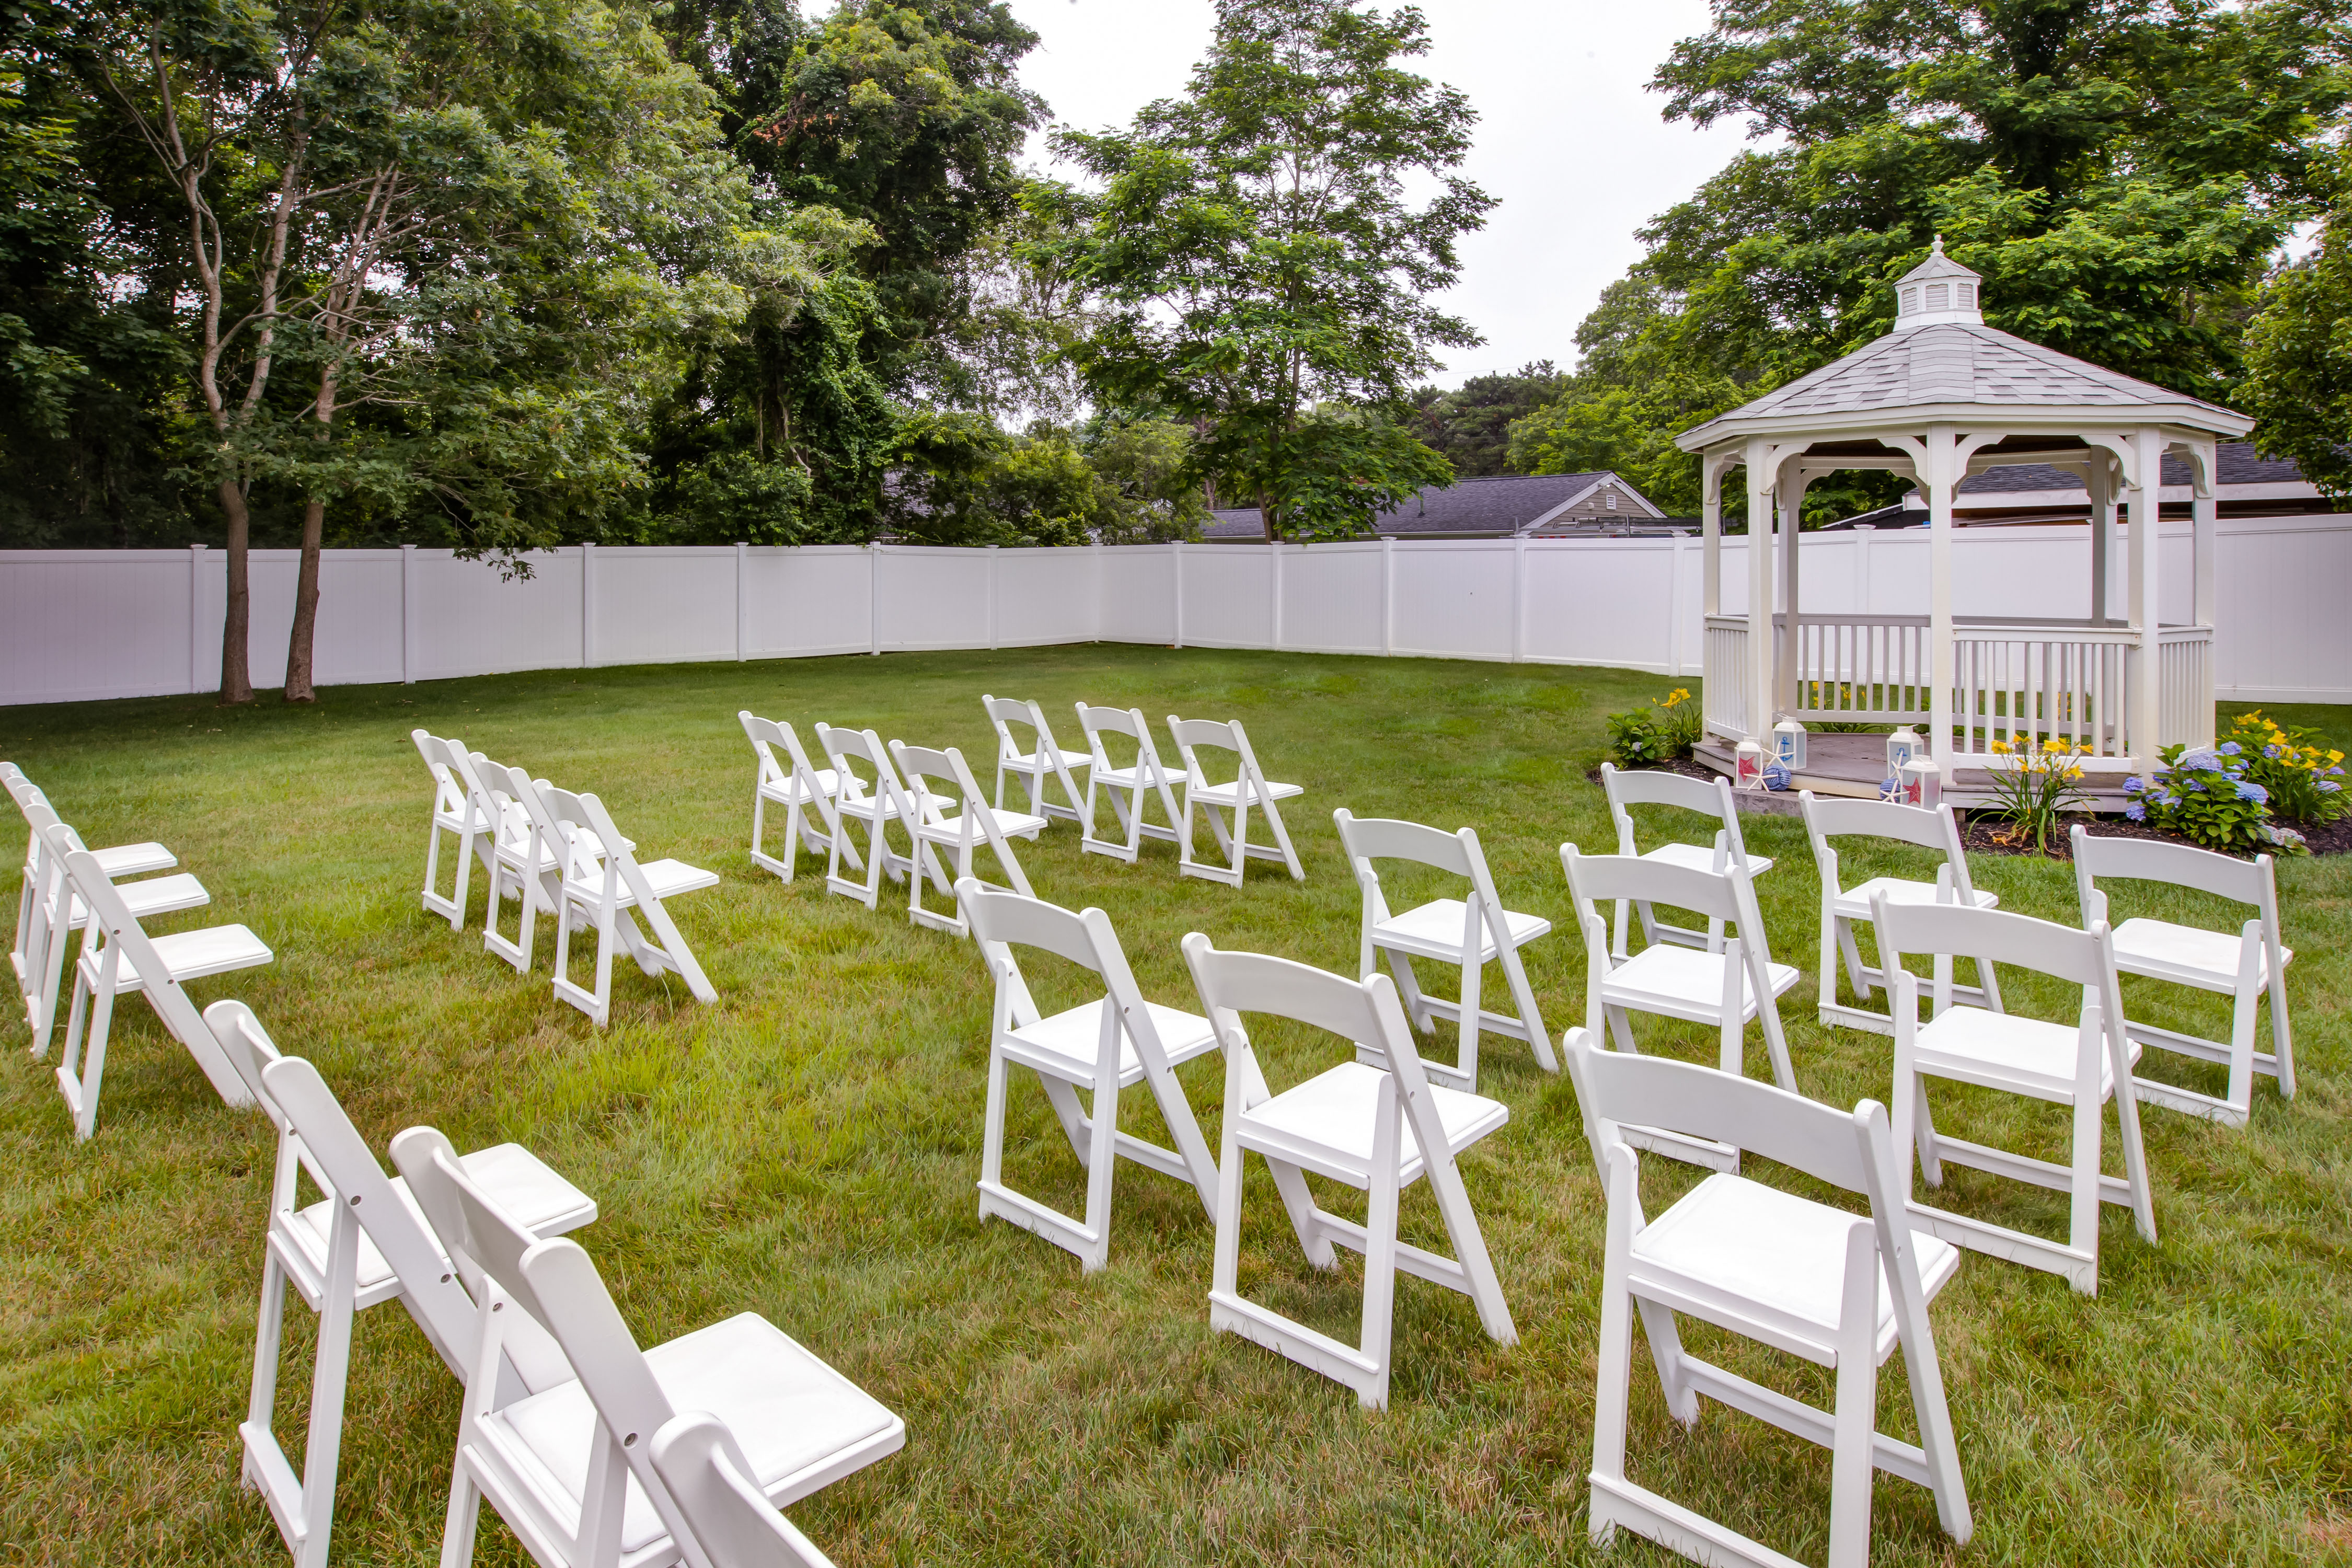 White Chairs Set Up for Reception on Hotel Lawn with Gazebo